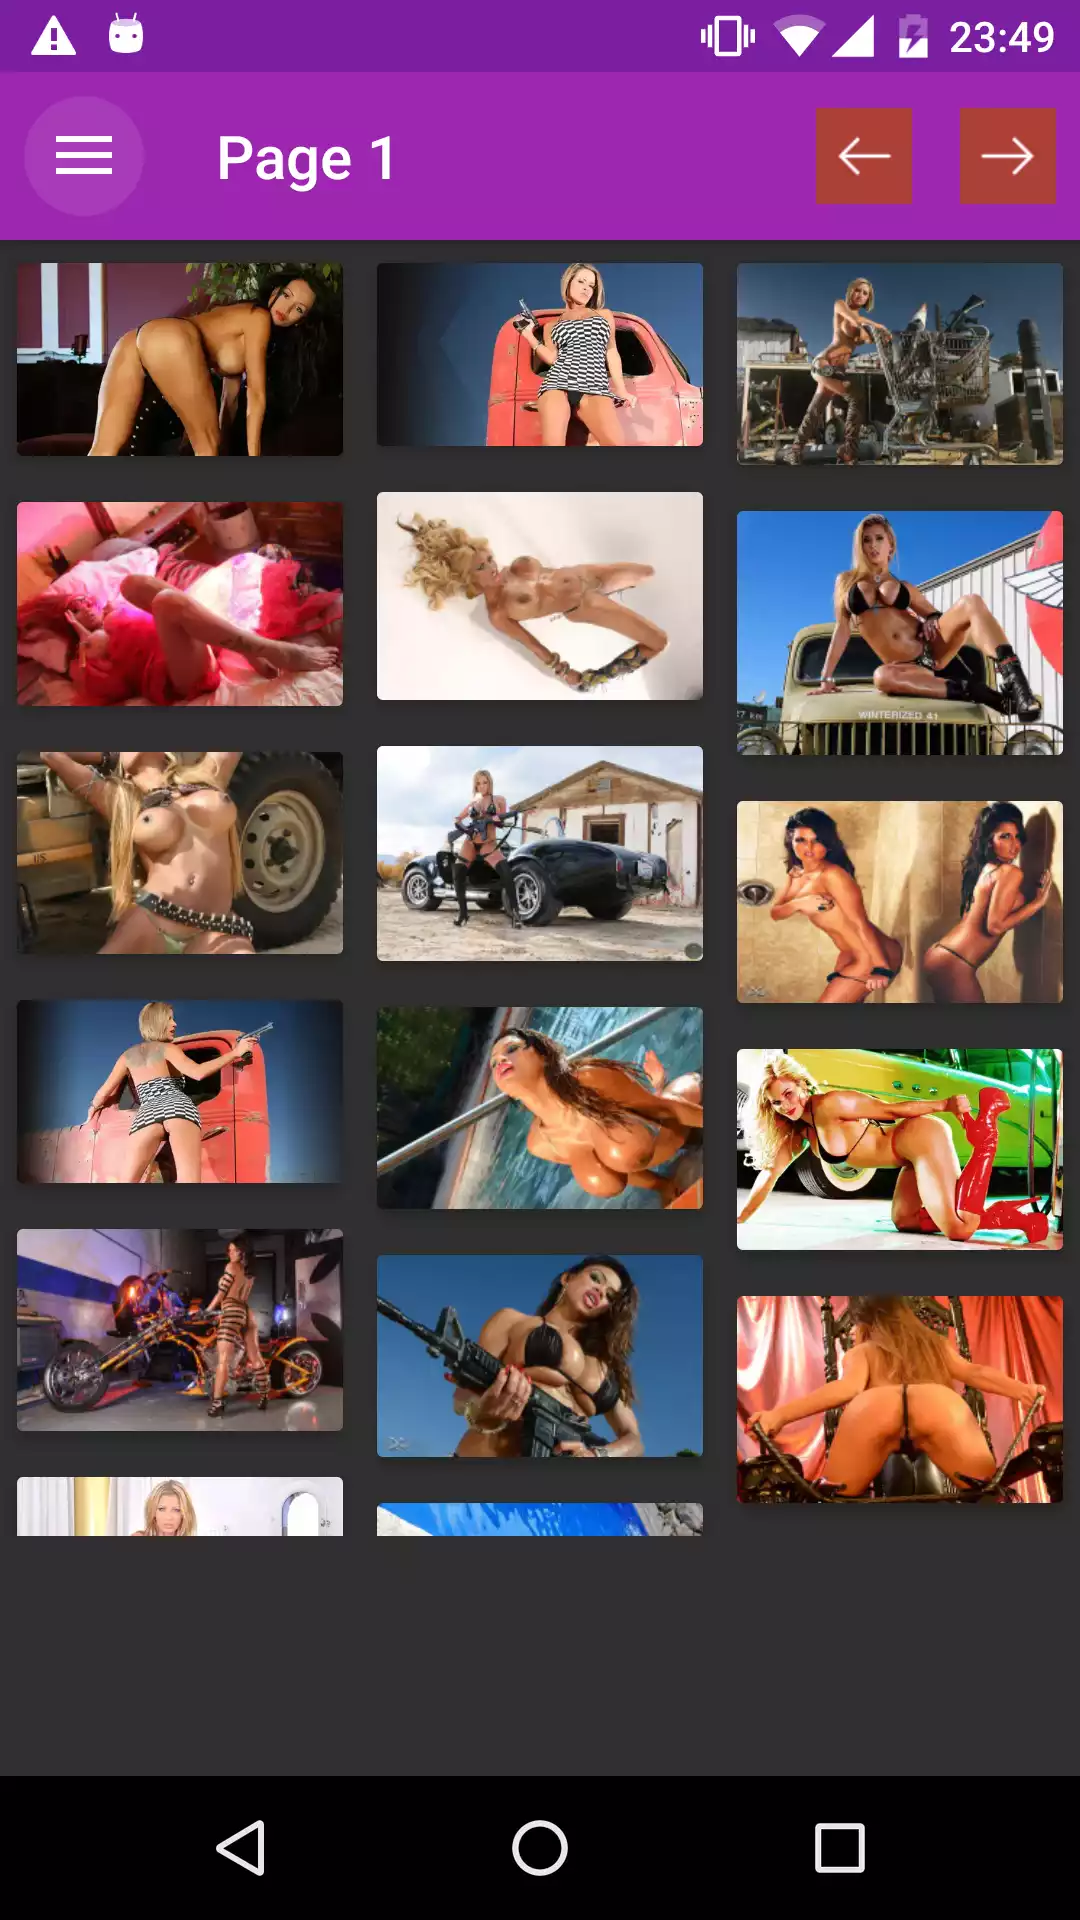 Action Wallpapers best,top,erotic,android,backgrounds,oictures,photo,the,sexy,pics,blowbang,apk,gallery,app,wallpapers,updates,hentai,wallpaper,galleries